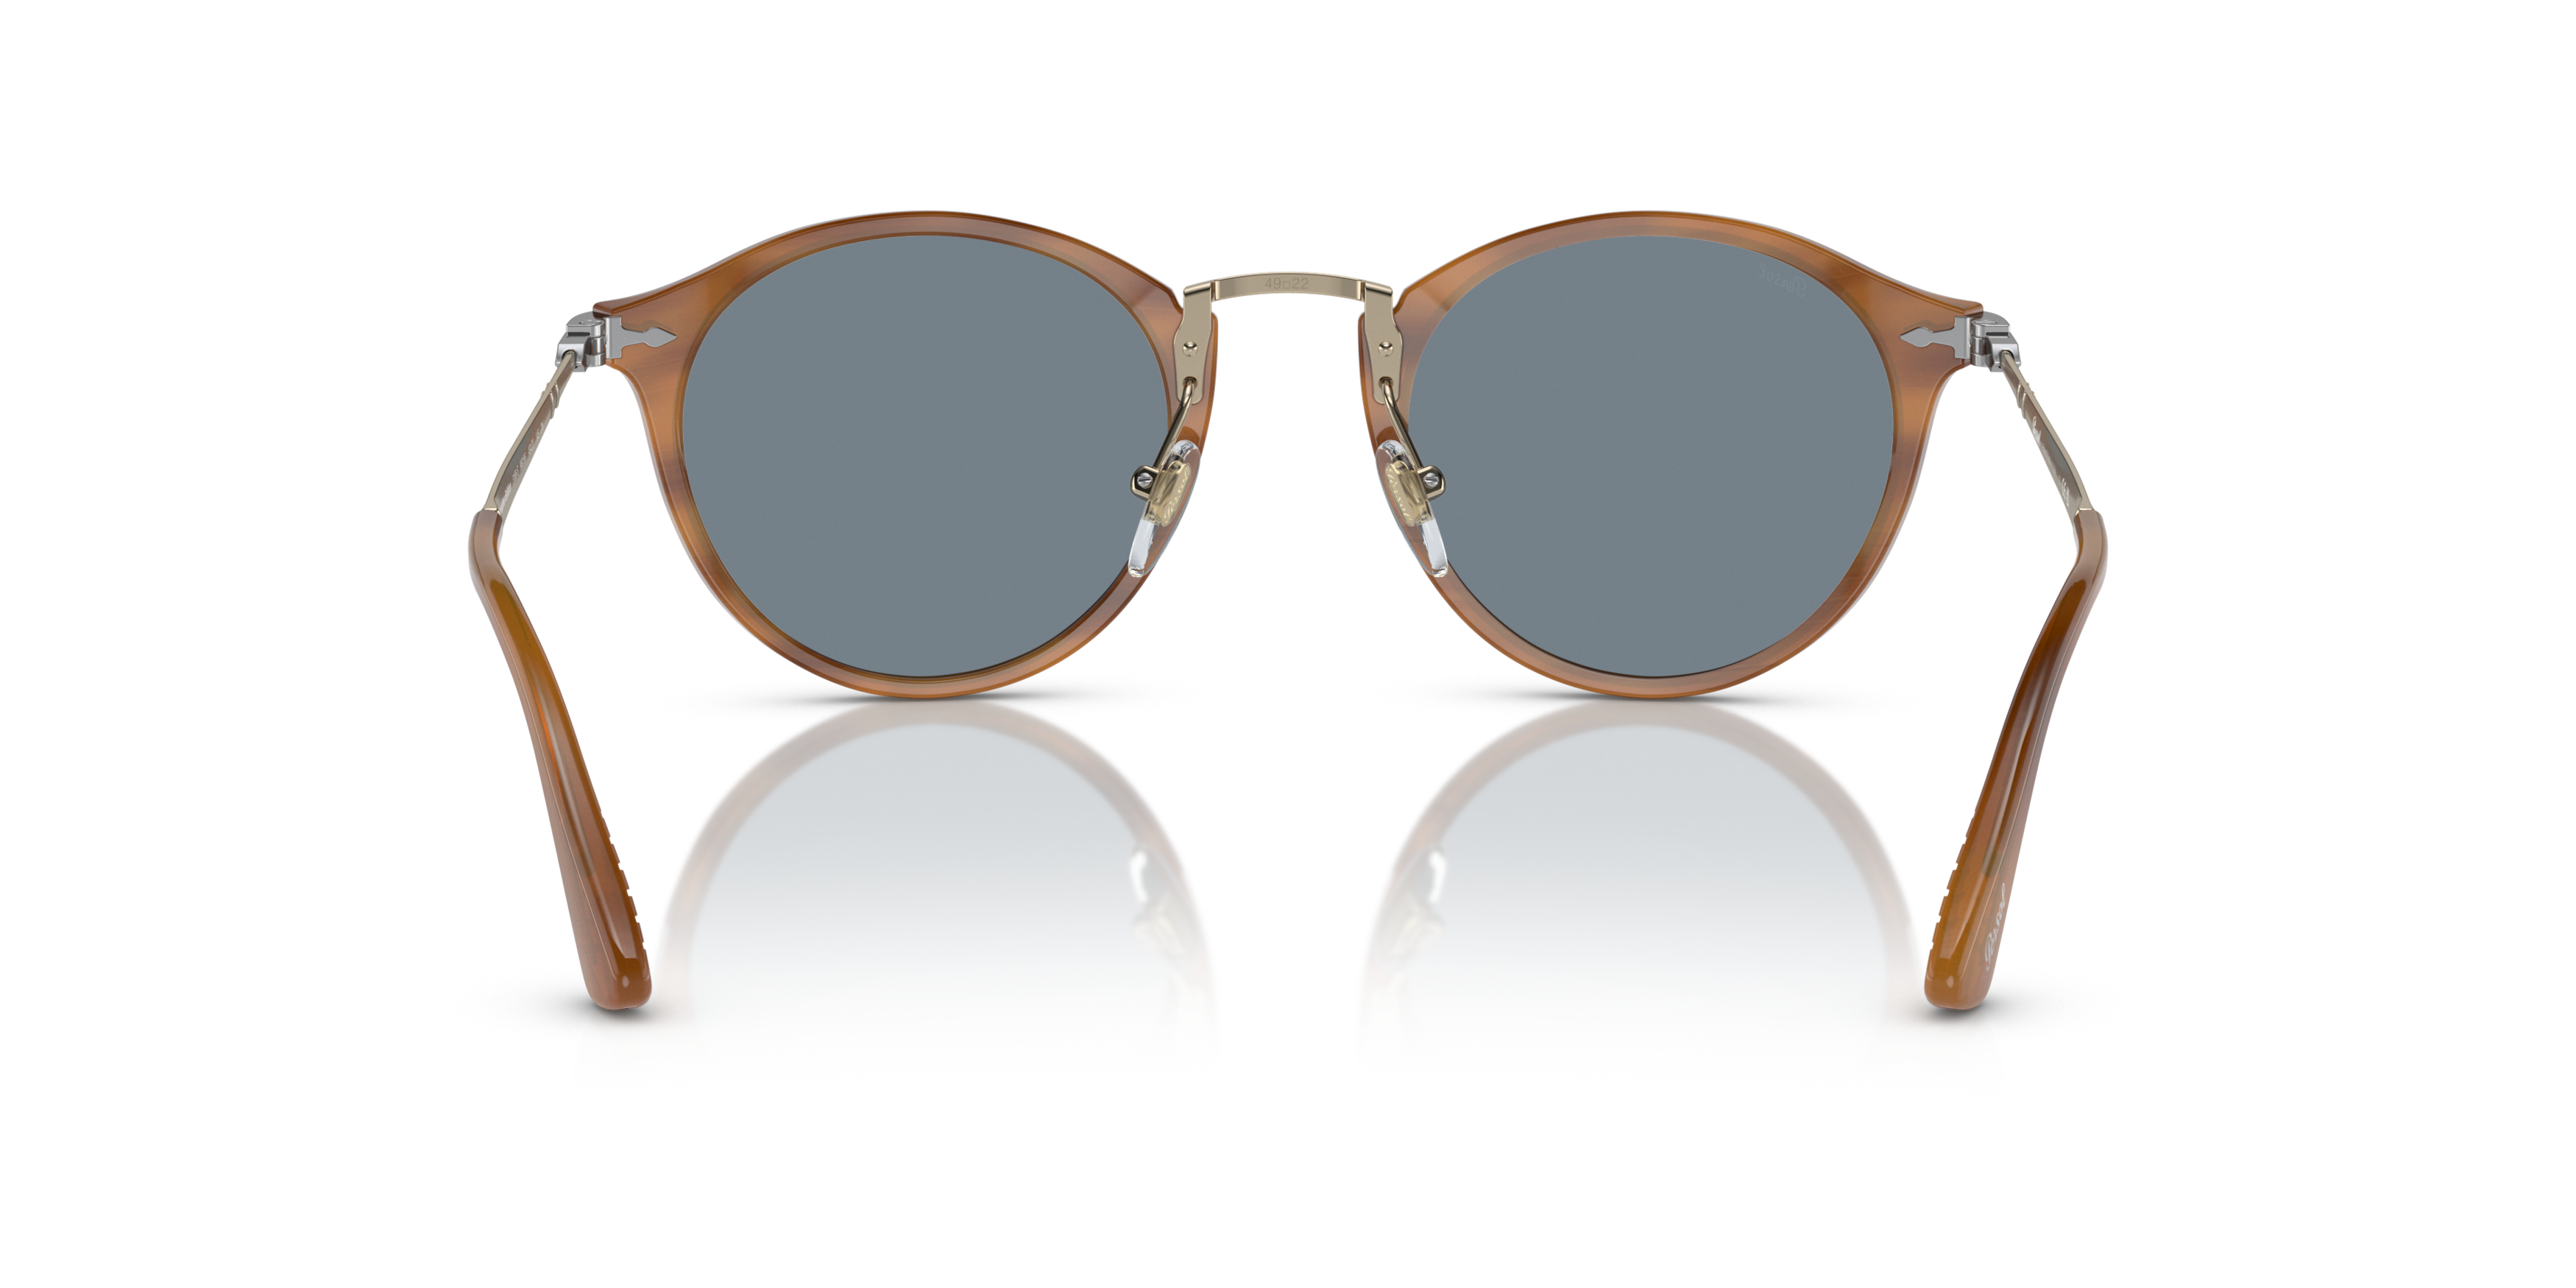 [products.image.detail02] Persol PO3166S 960